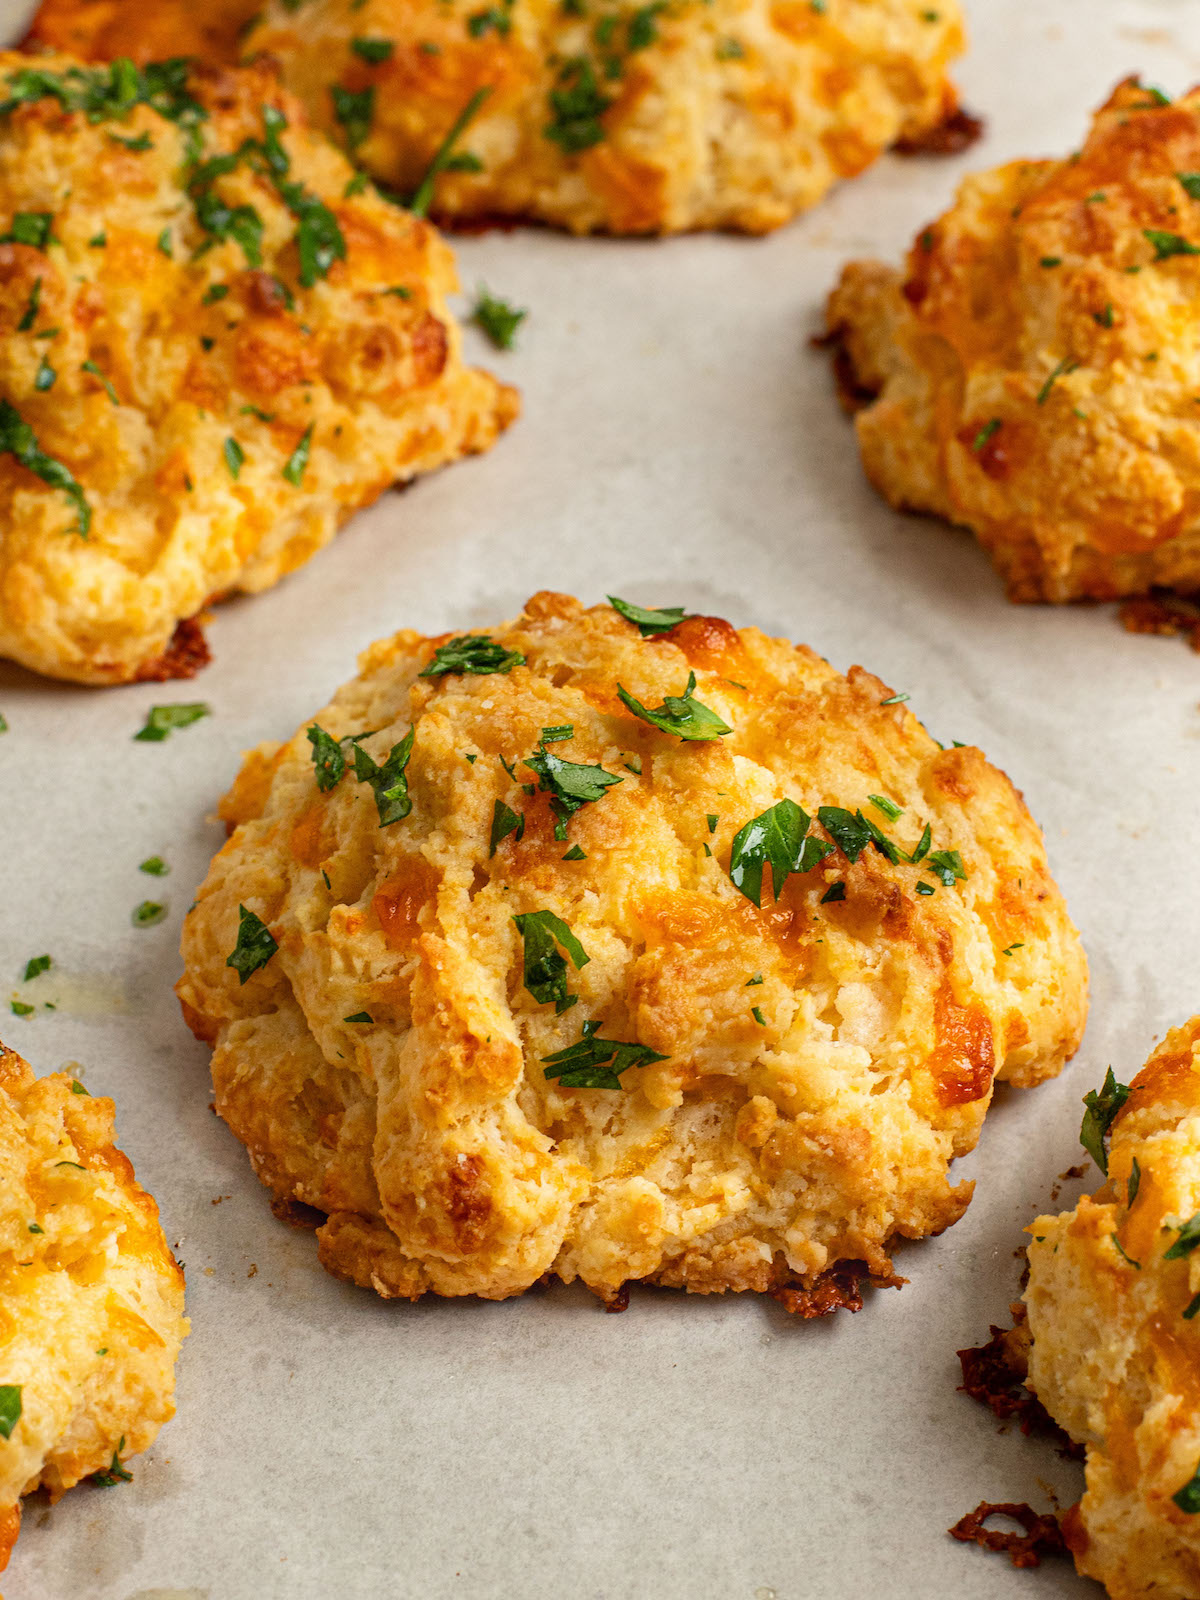 Cheddar Bay Biscuits Once Upon A Chef